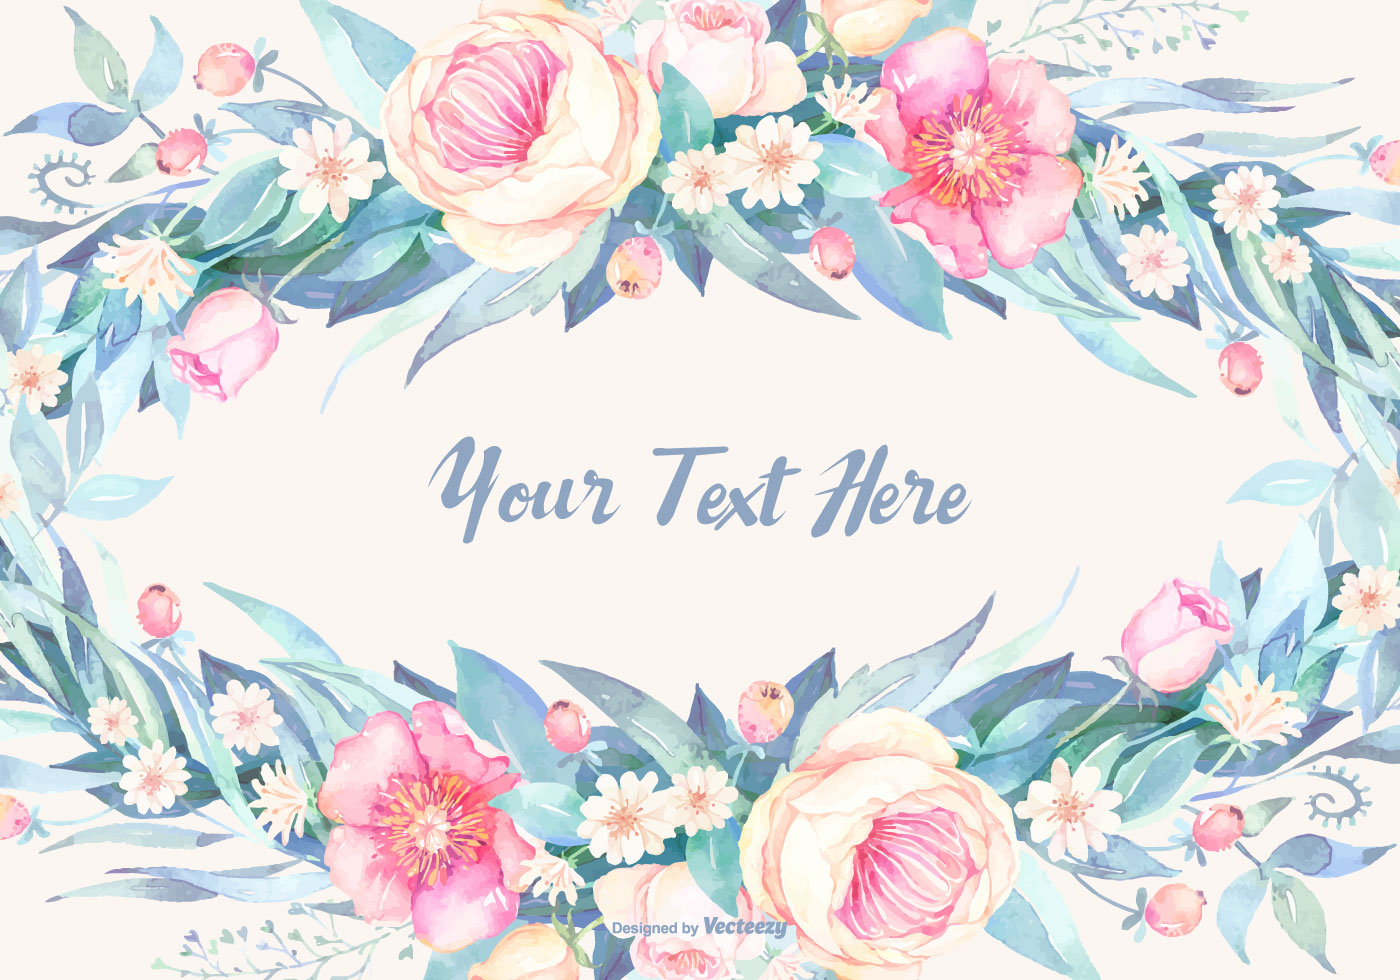 Beautiful Watercolor Flowers Background - Download Free Vector Art, Stock Graphics & Images